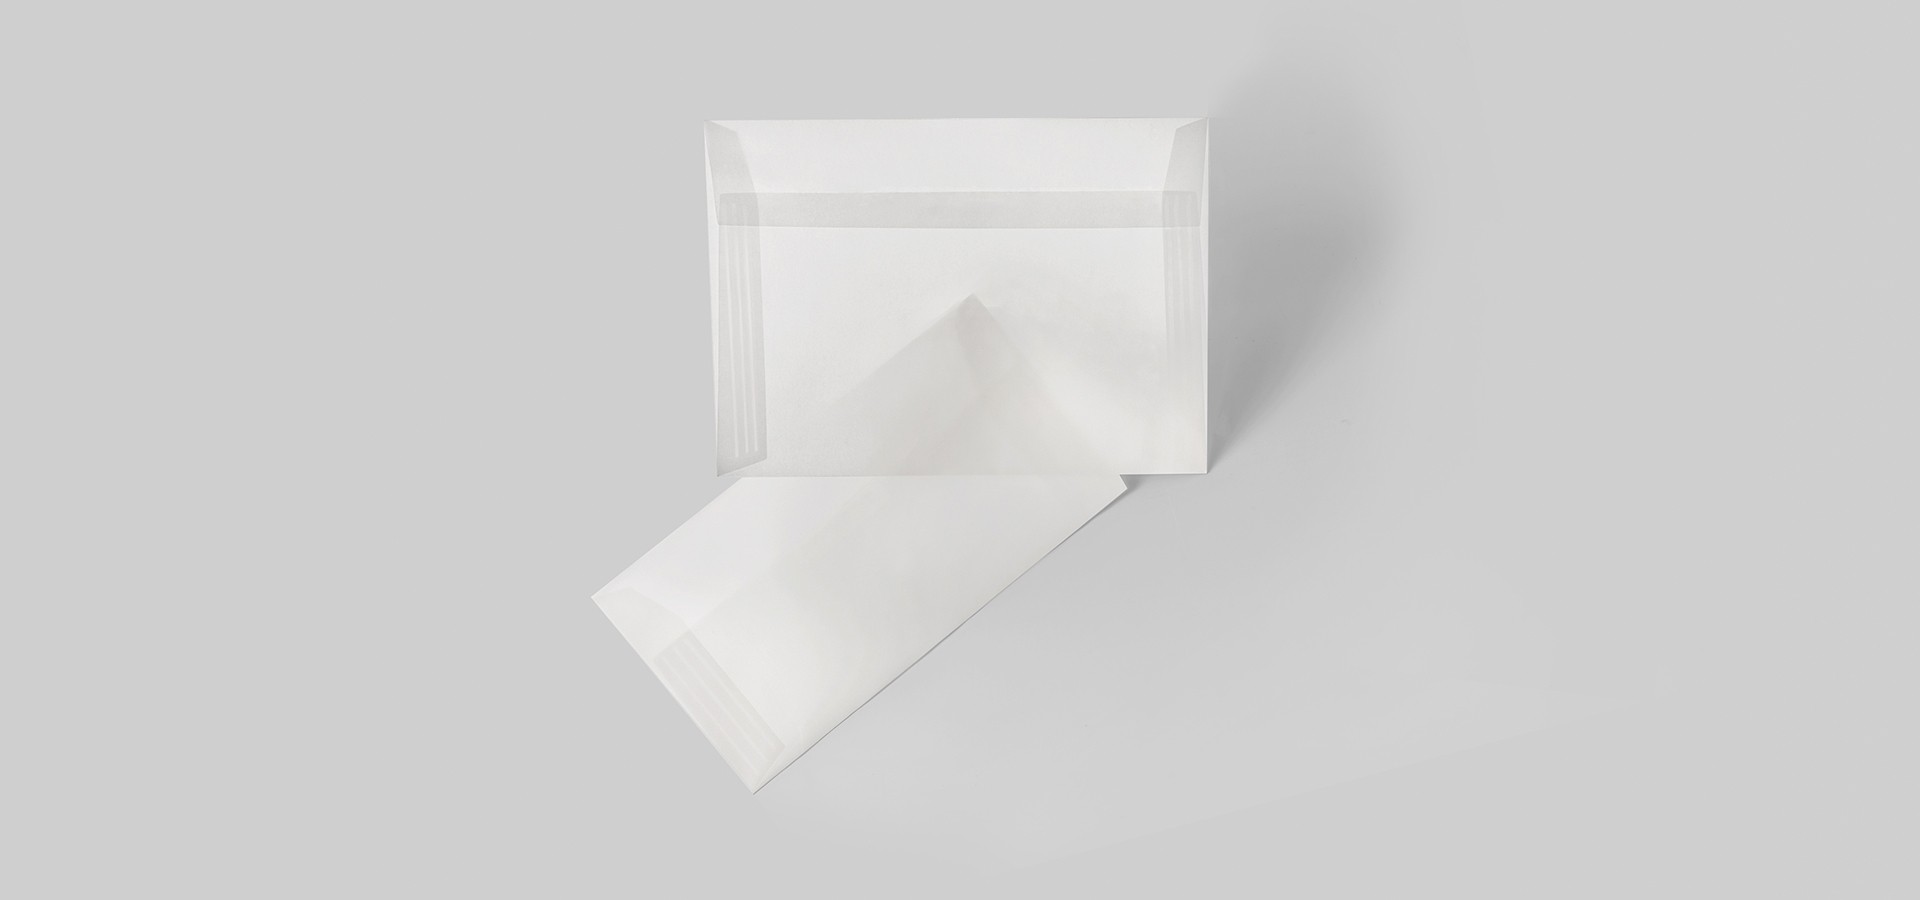 Cromatico packaging, les enveloppes